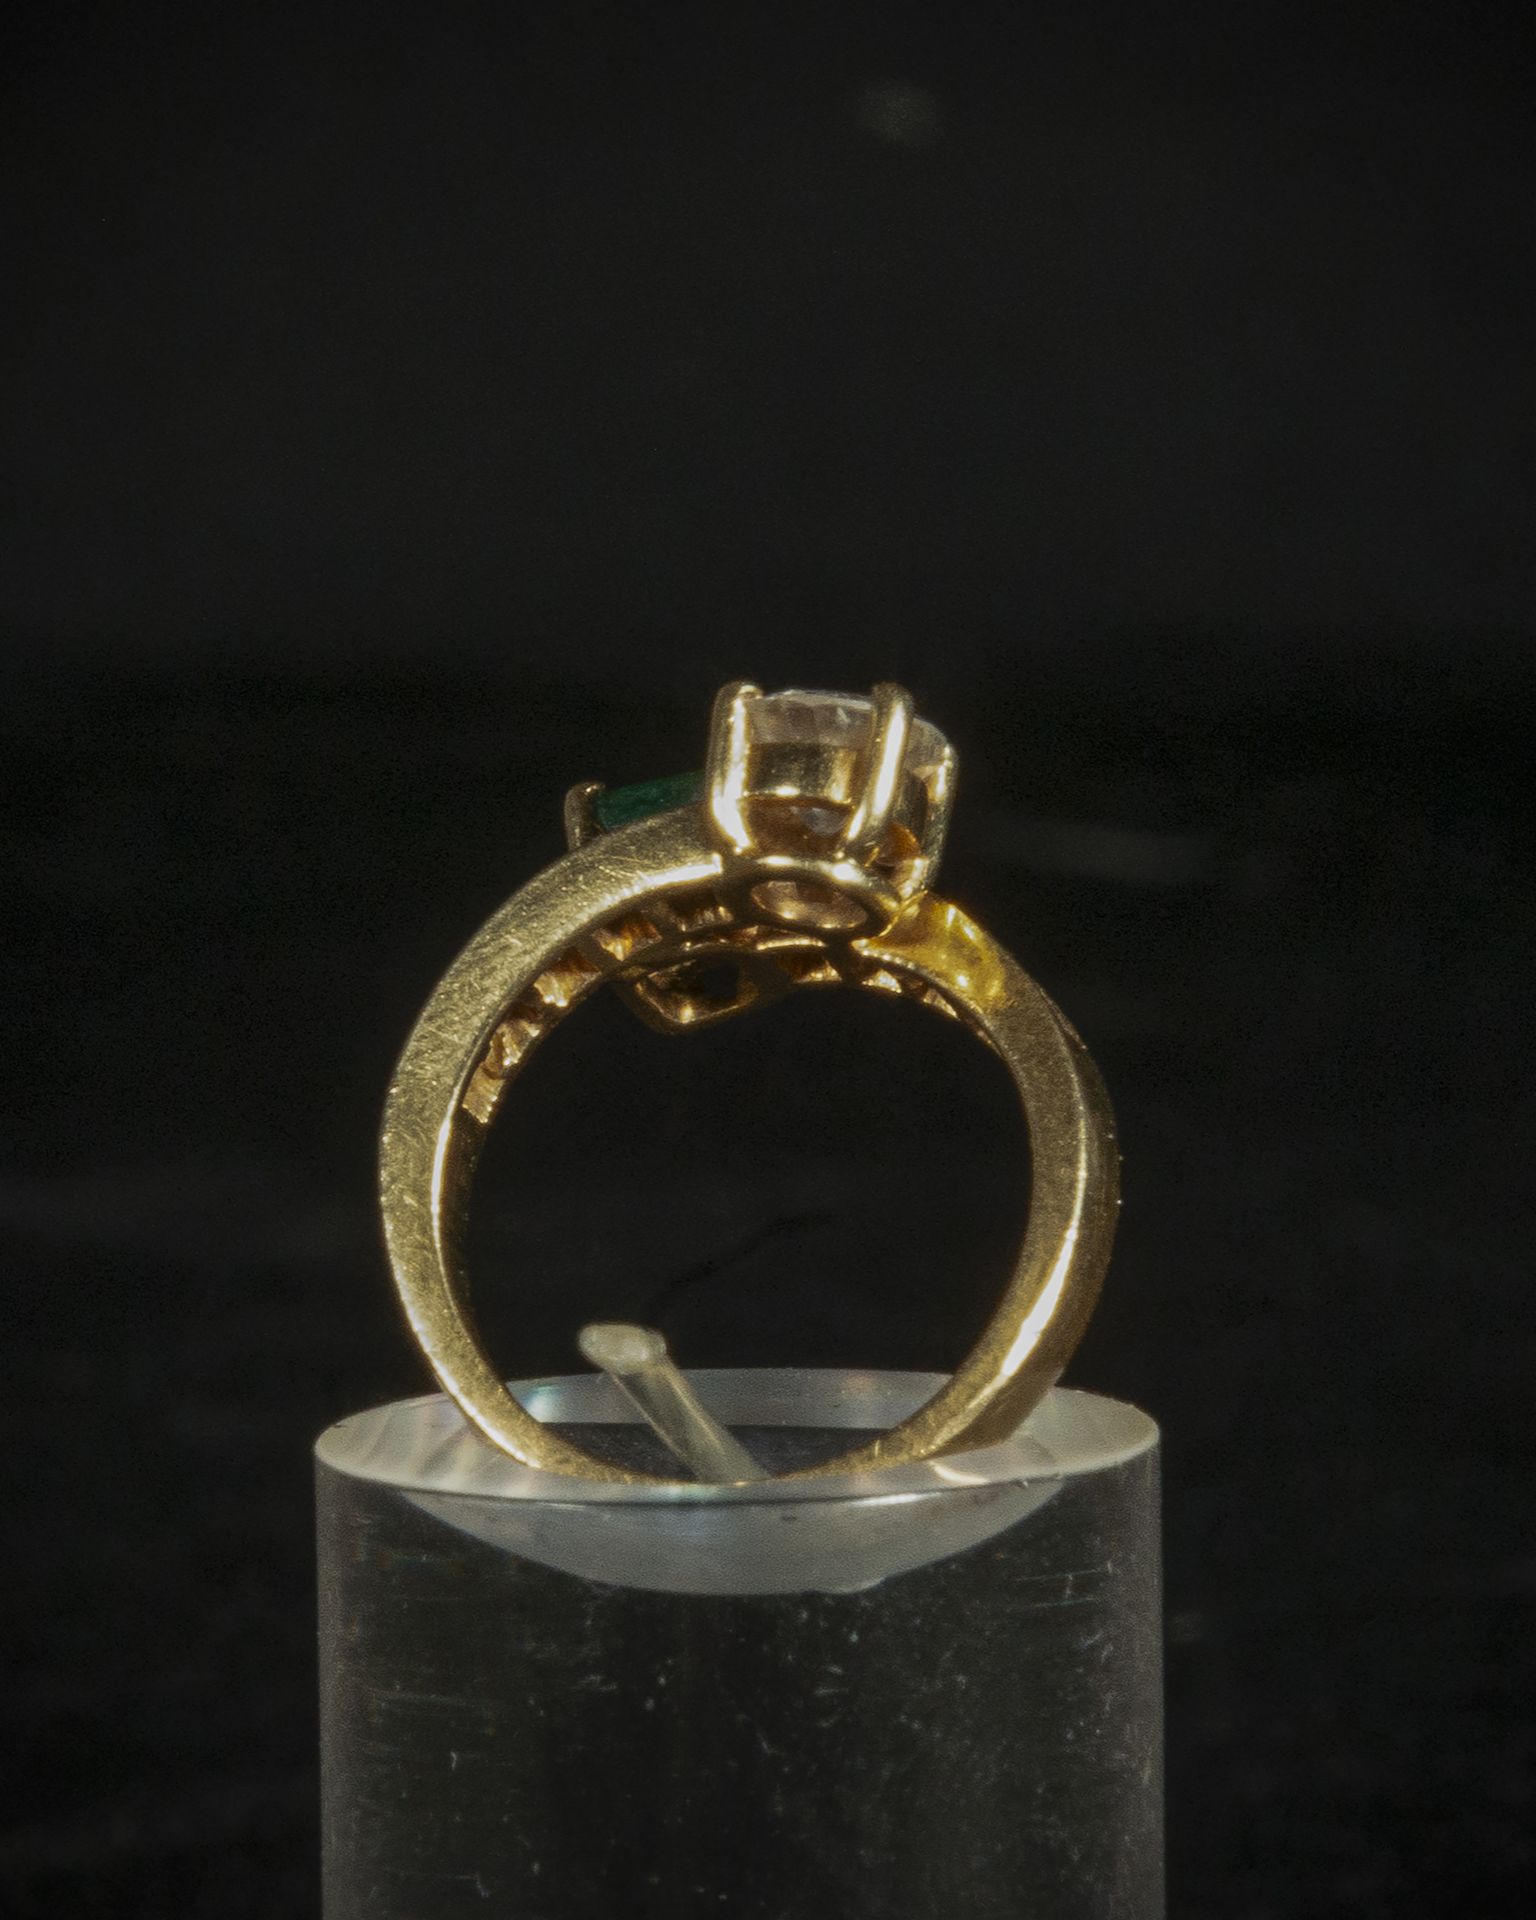 Elegant you and me ring with 1ct brilliant cut VS - G Diamond, good transparency and color and 1ct M - Image 3 of 4